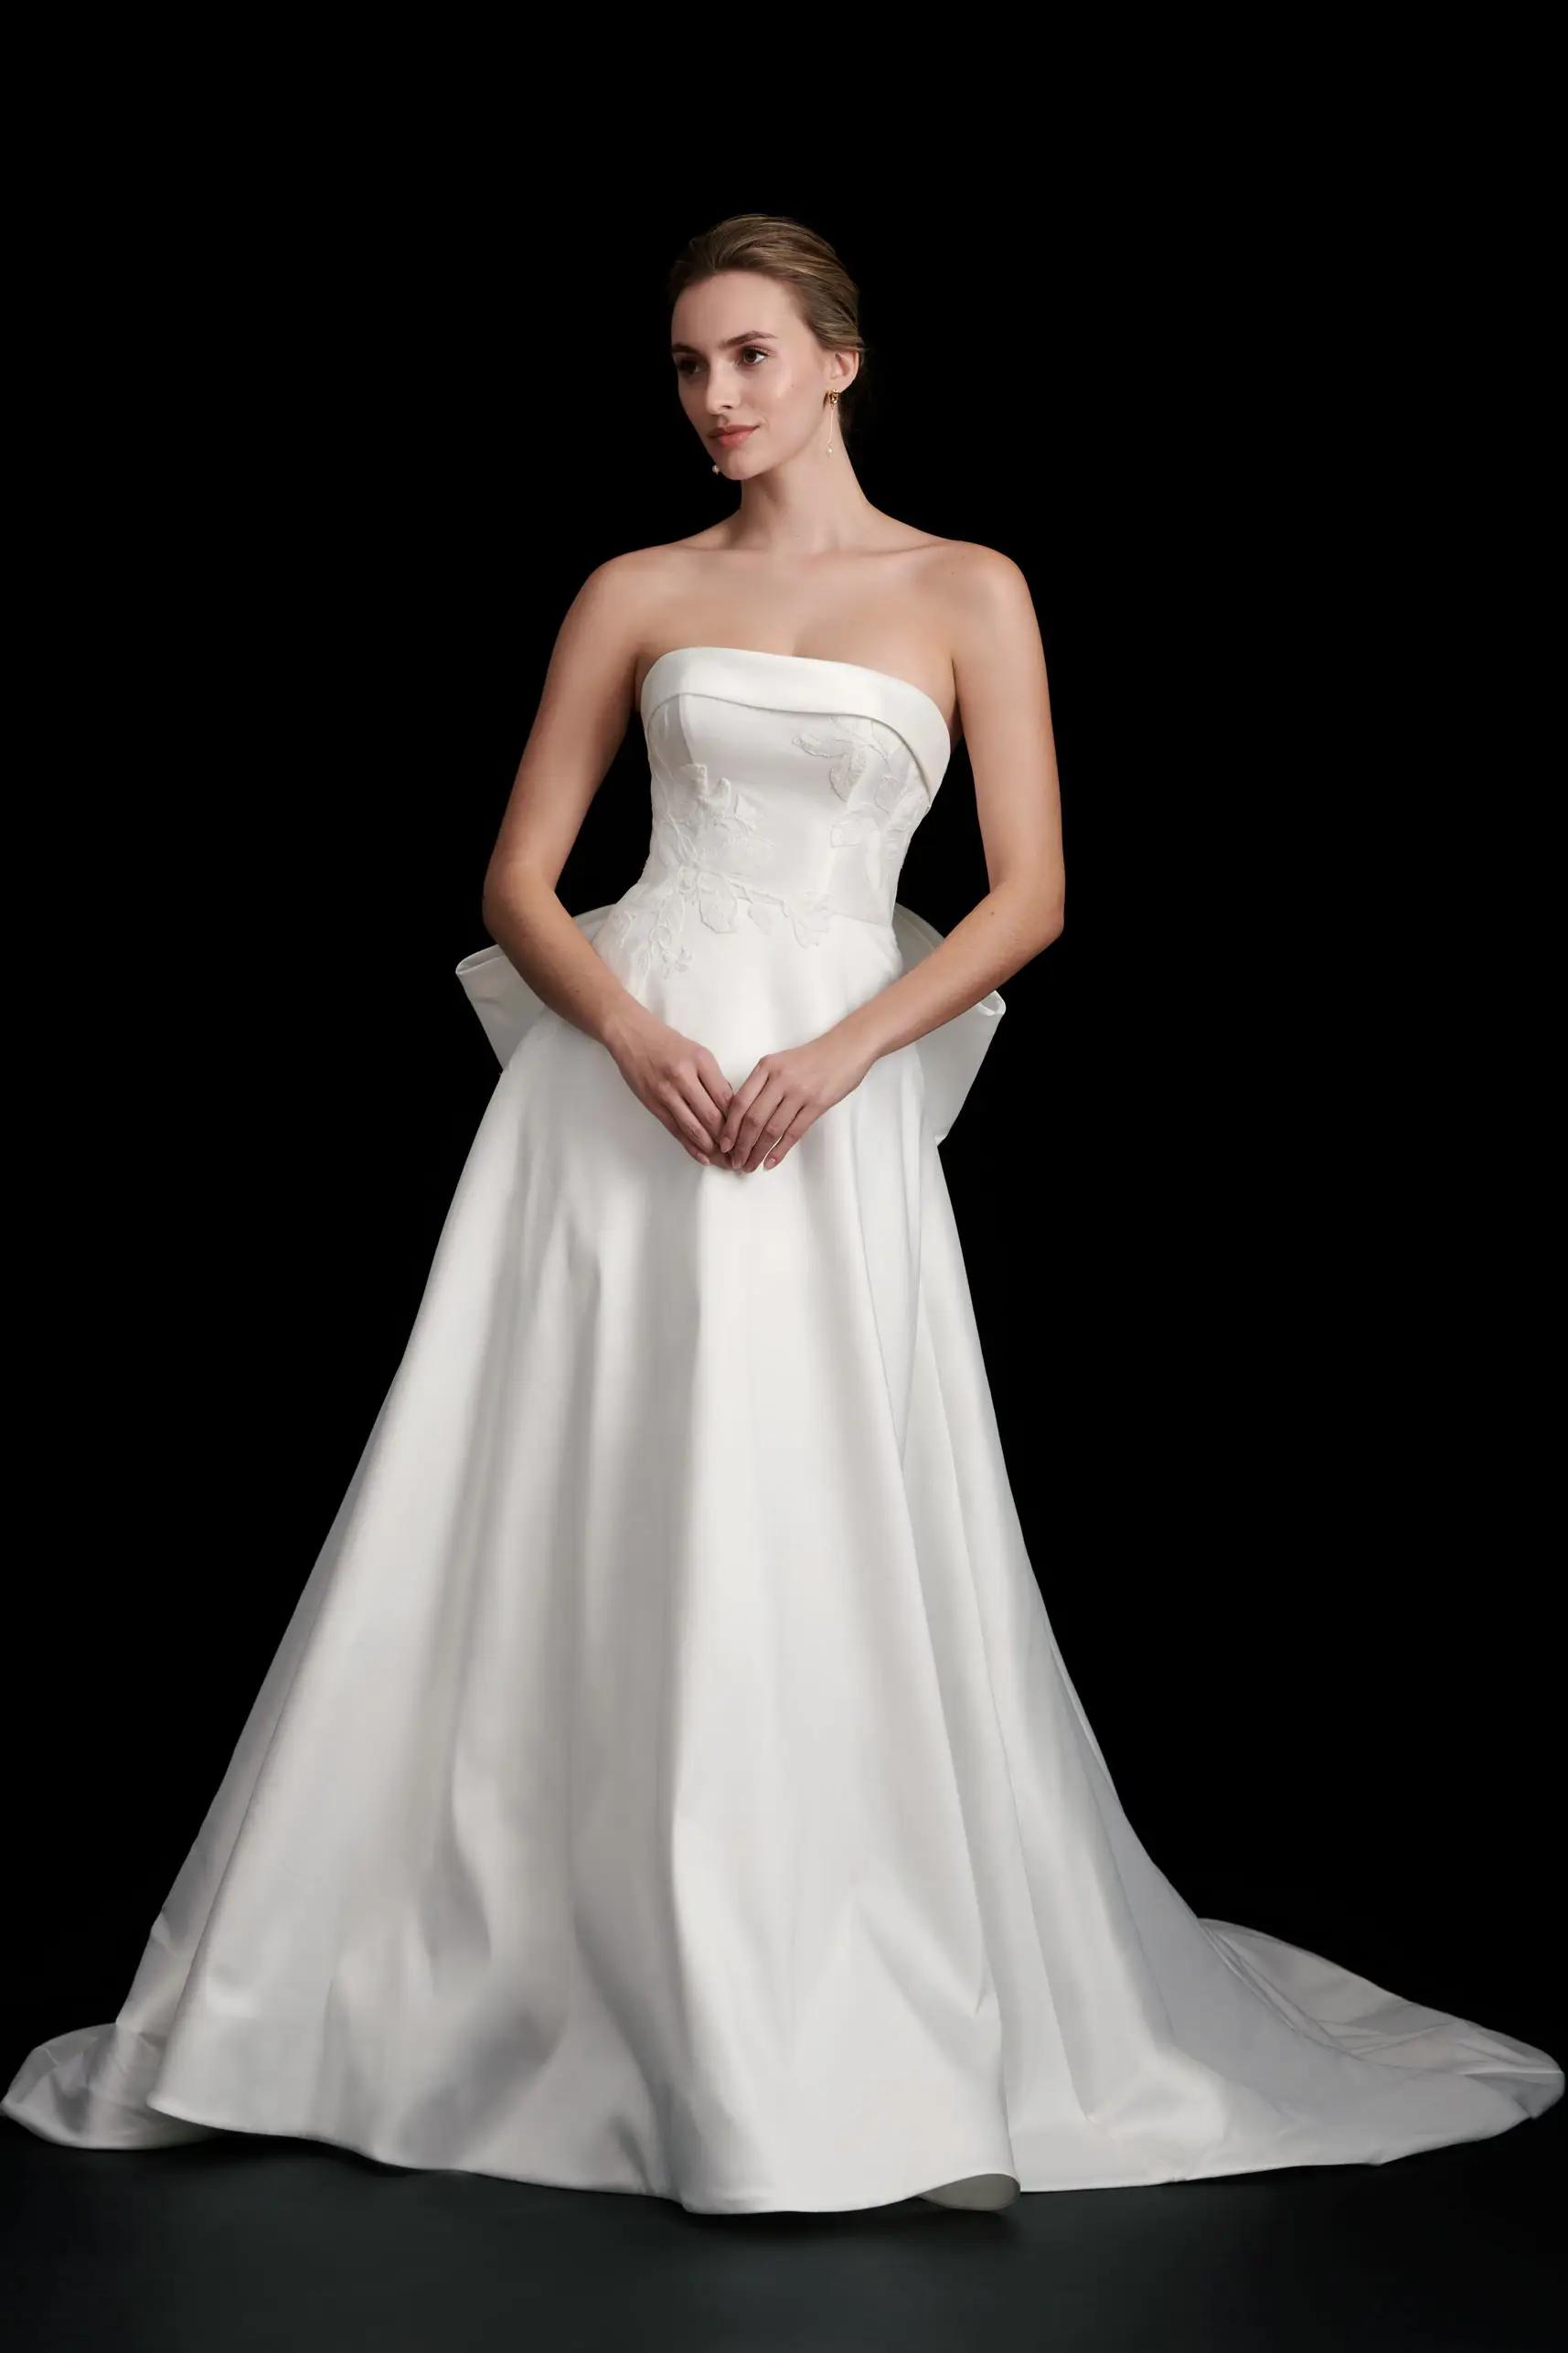 Constance wedding dress with strapless lace bodice and mikado a line skirt with bow detail on the back in Columbus, Ohio